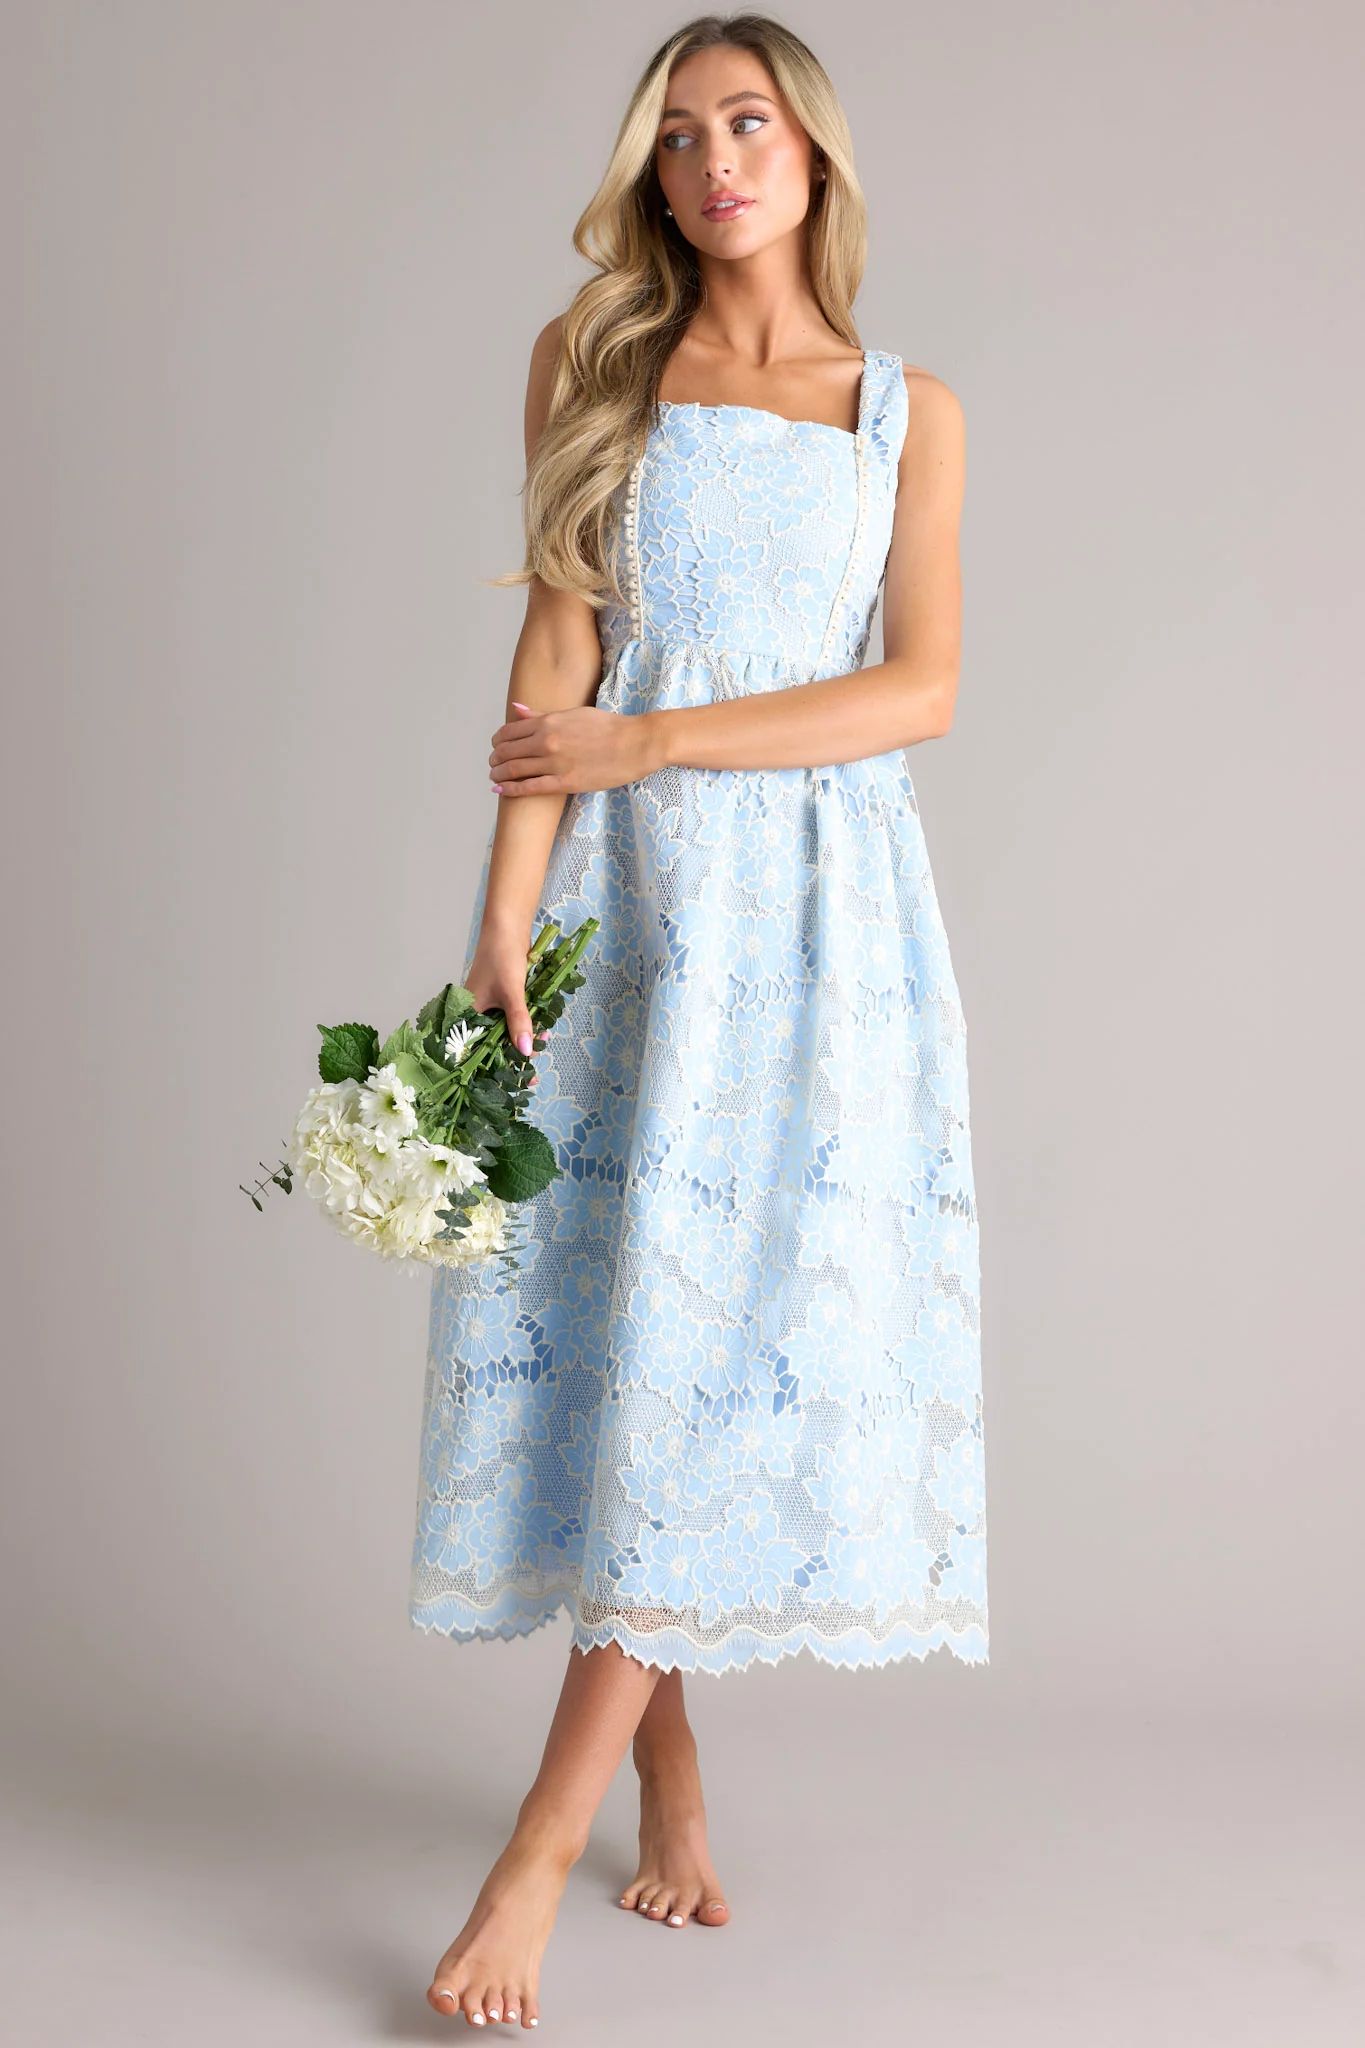 Fly A Kite Sky Blue Floral Embroidered Midi Dress | Red Dress